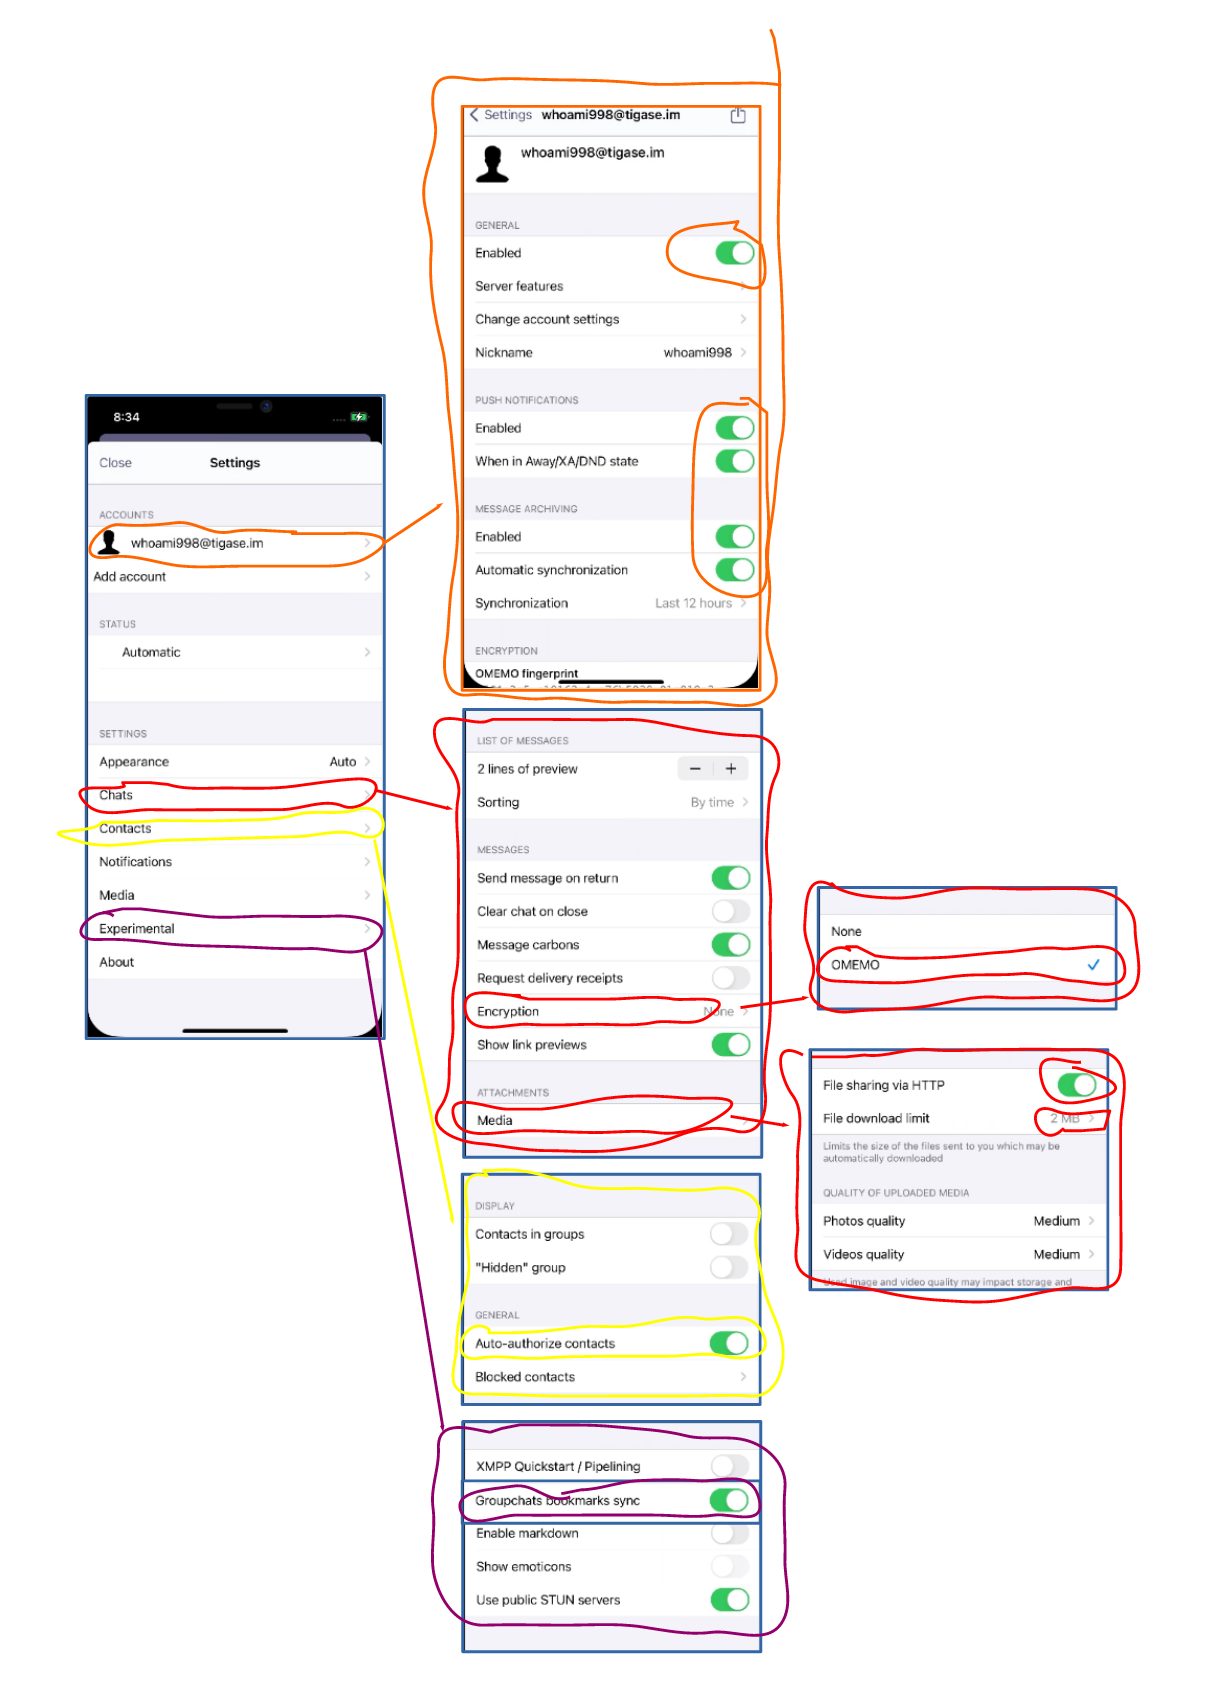 screenshots of siskin config screens showing how to configure it